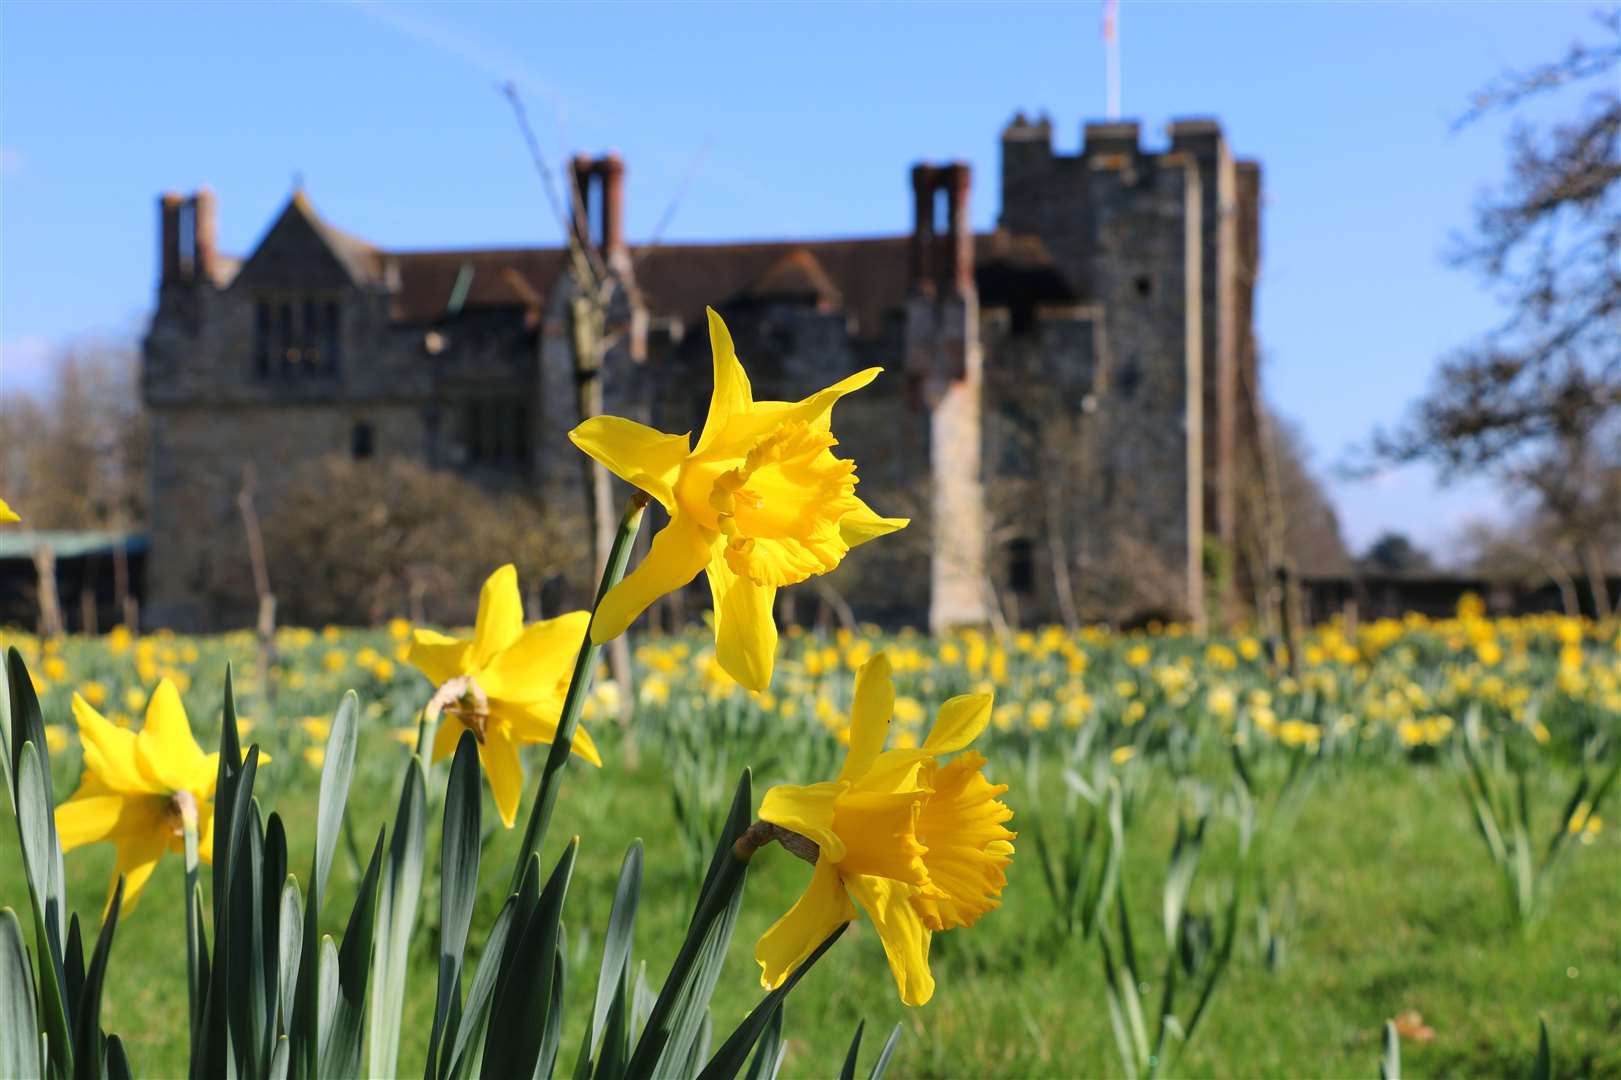 Daffodils will be in bloom soon at Hever Castle